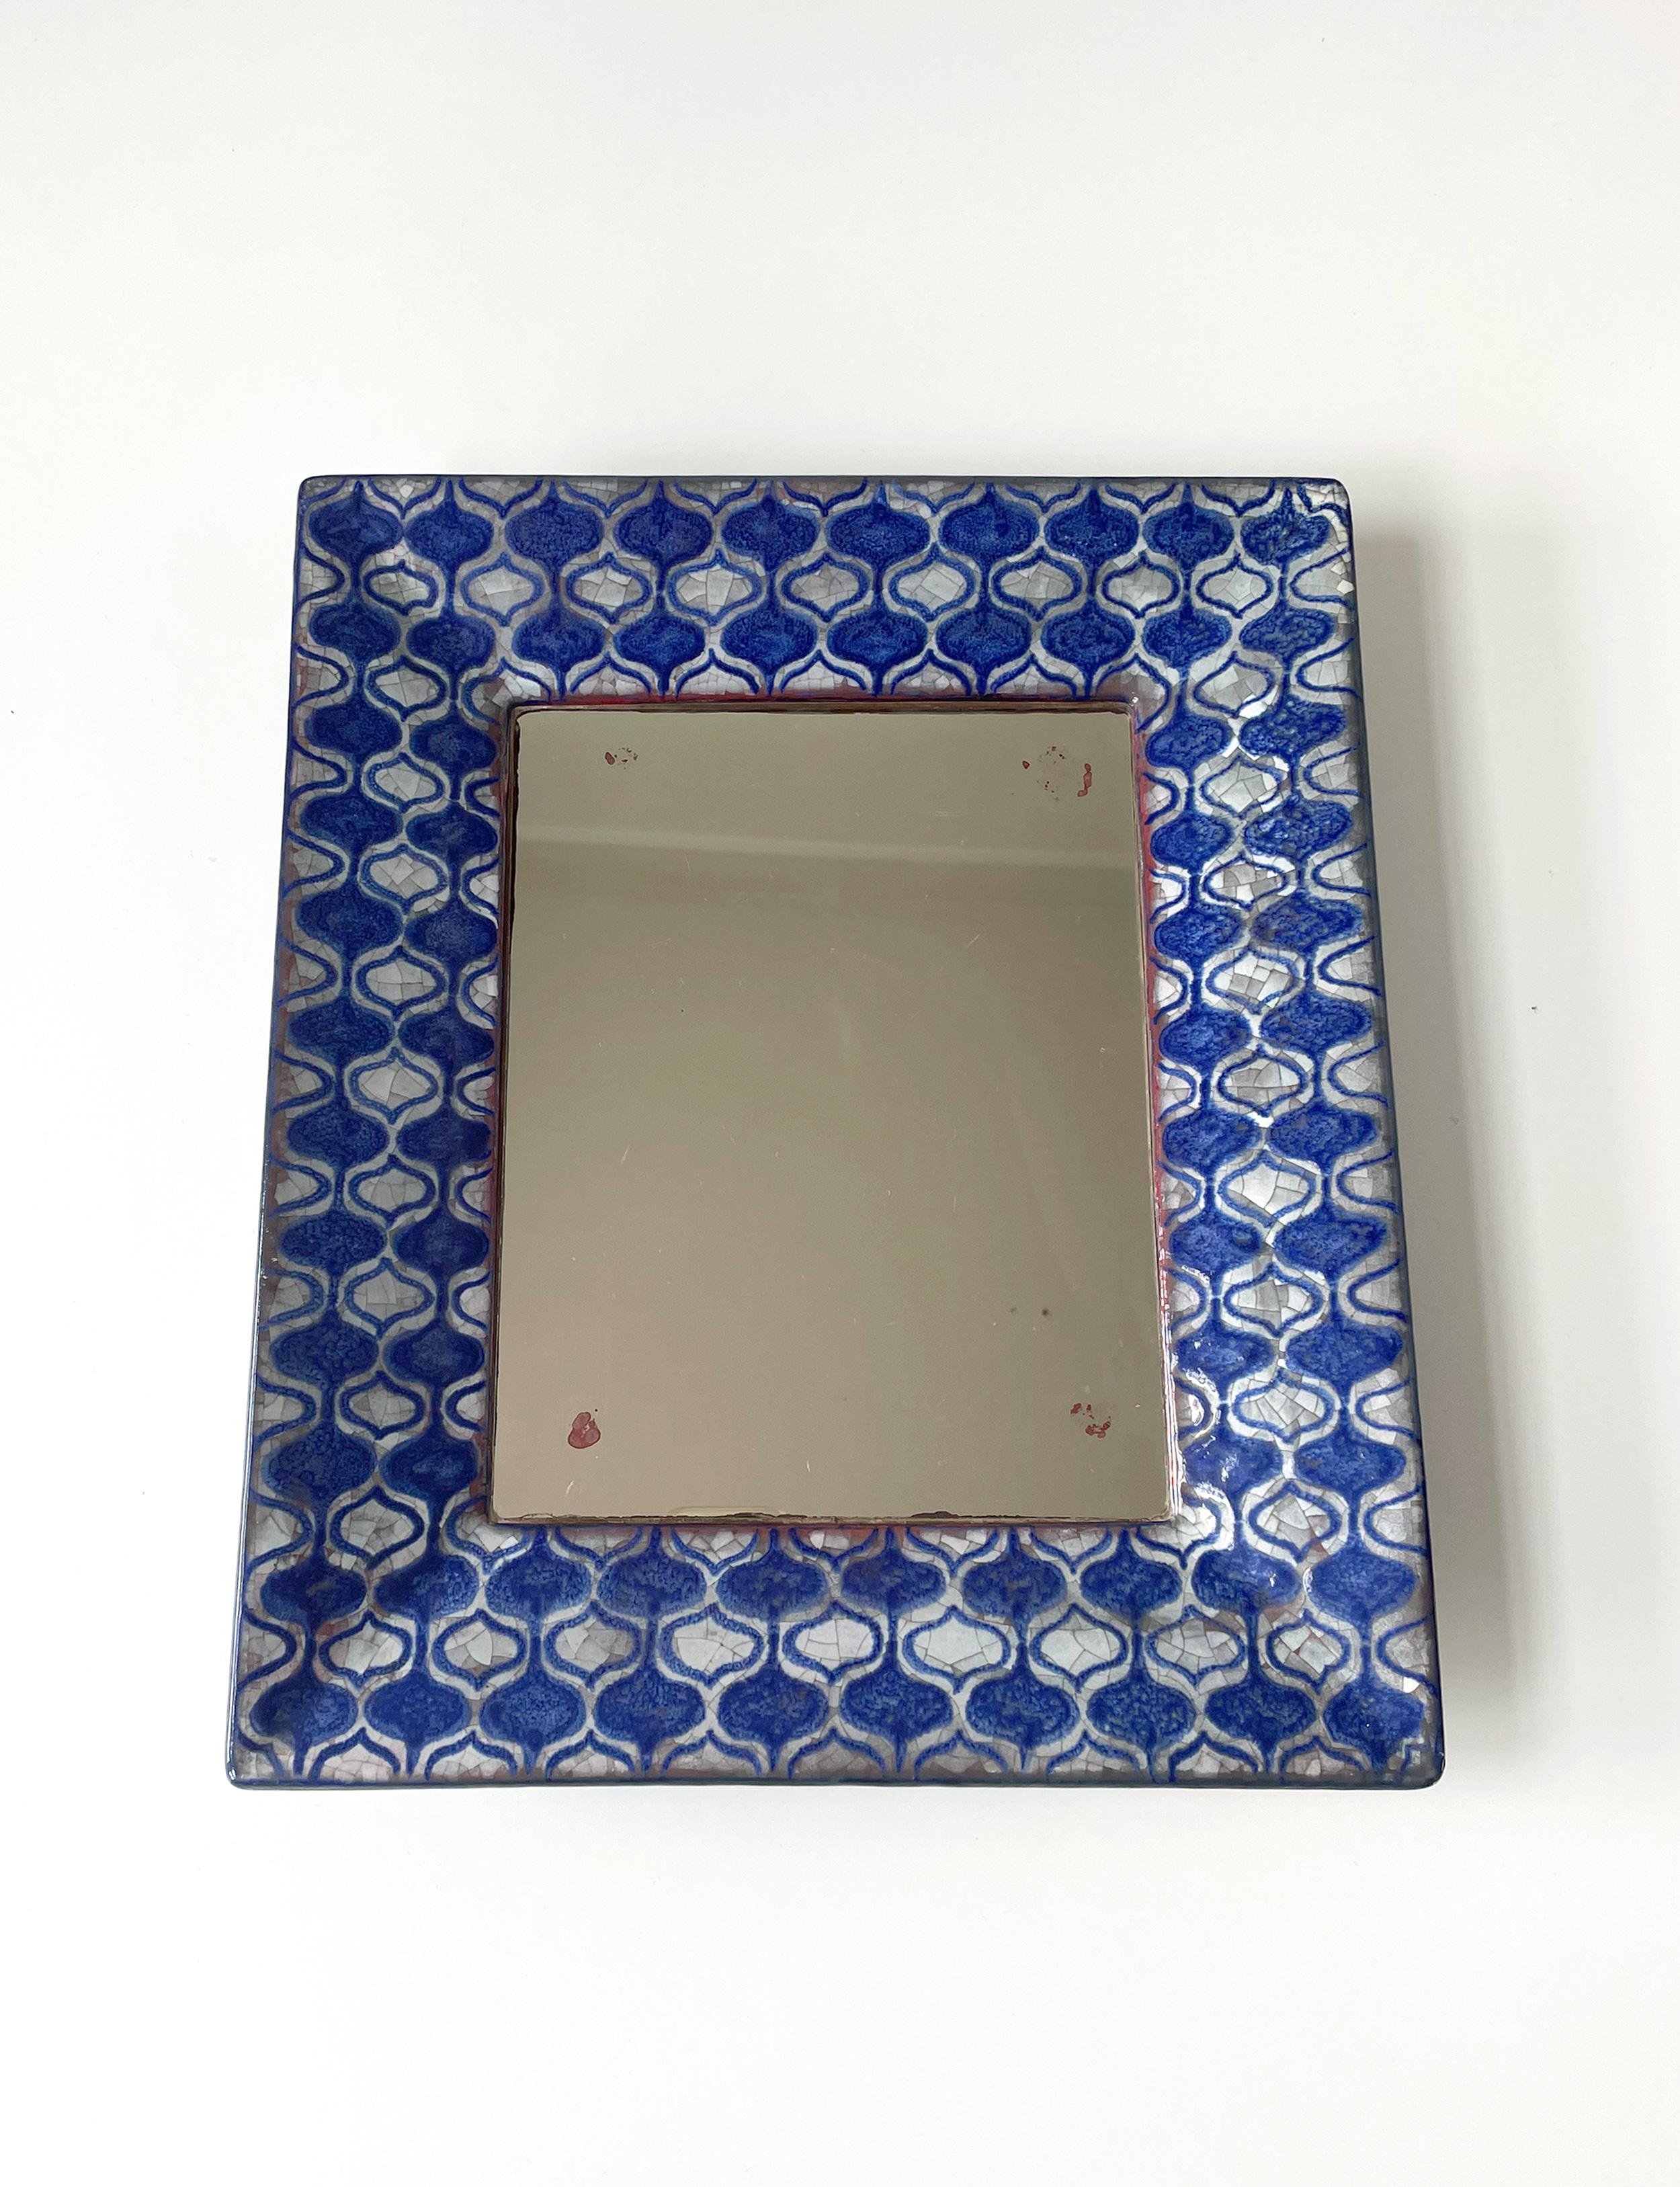 Vintage Persia Glazed Ceramic Wall Mirror, Michael Andersen, 1960s For Sale 5